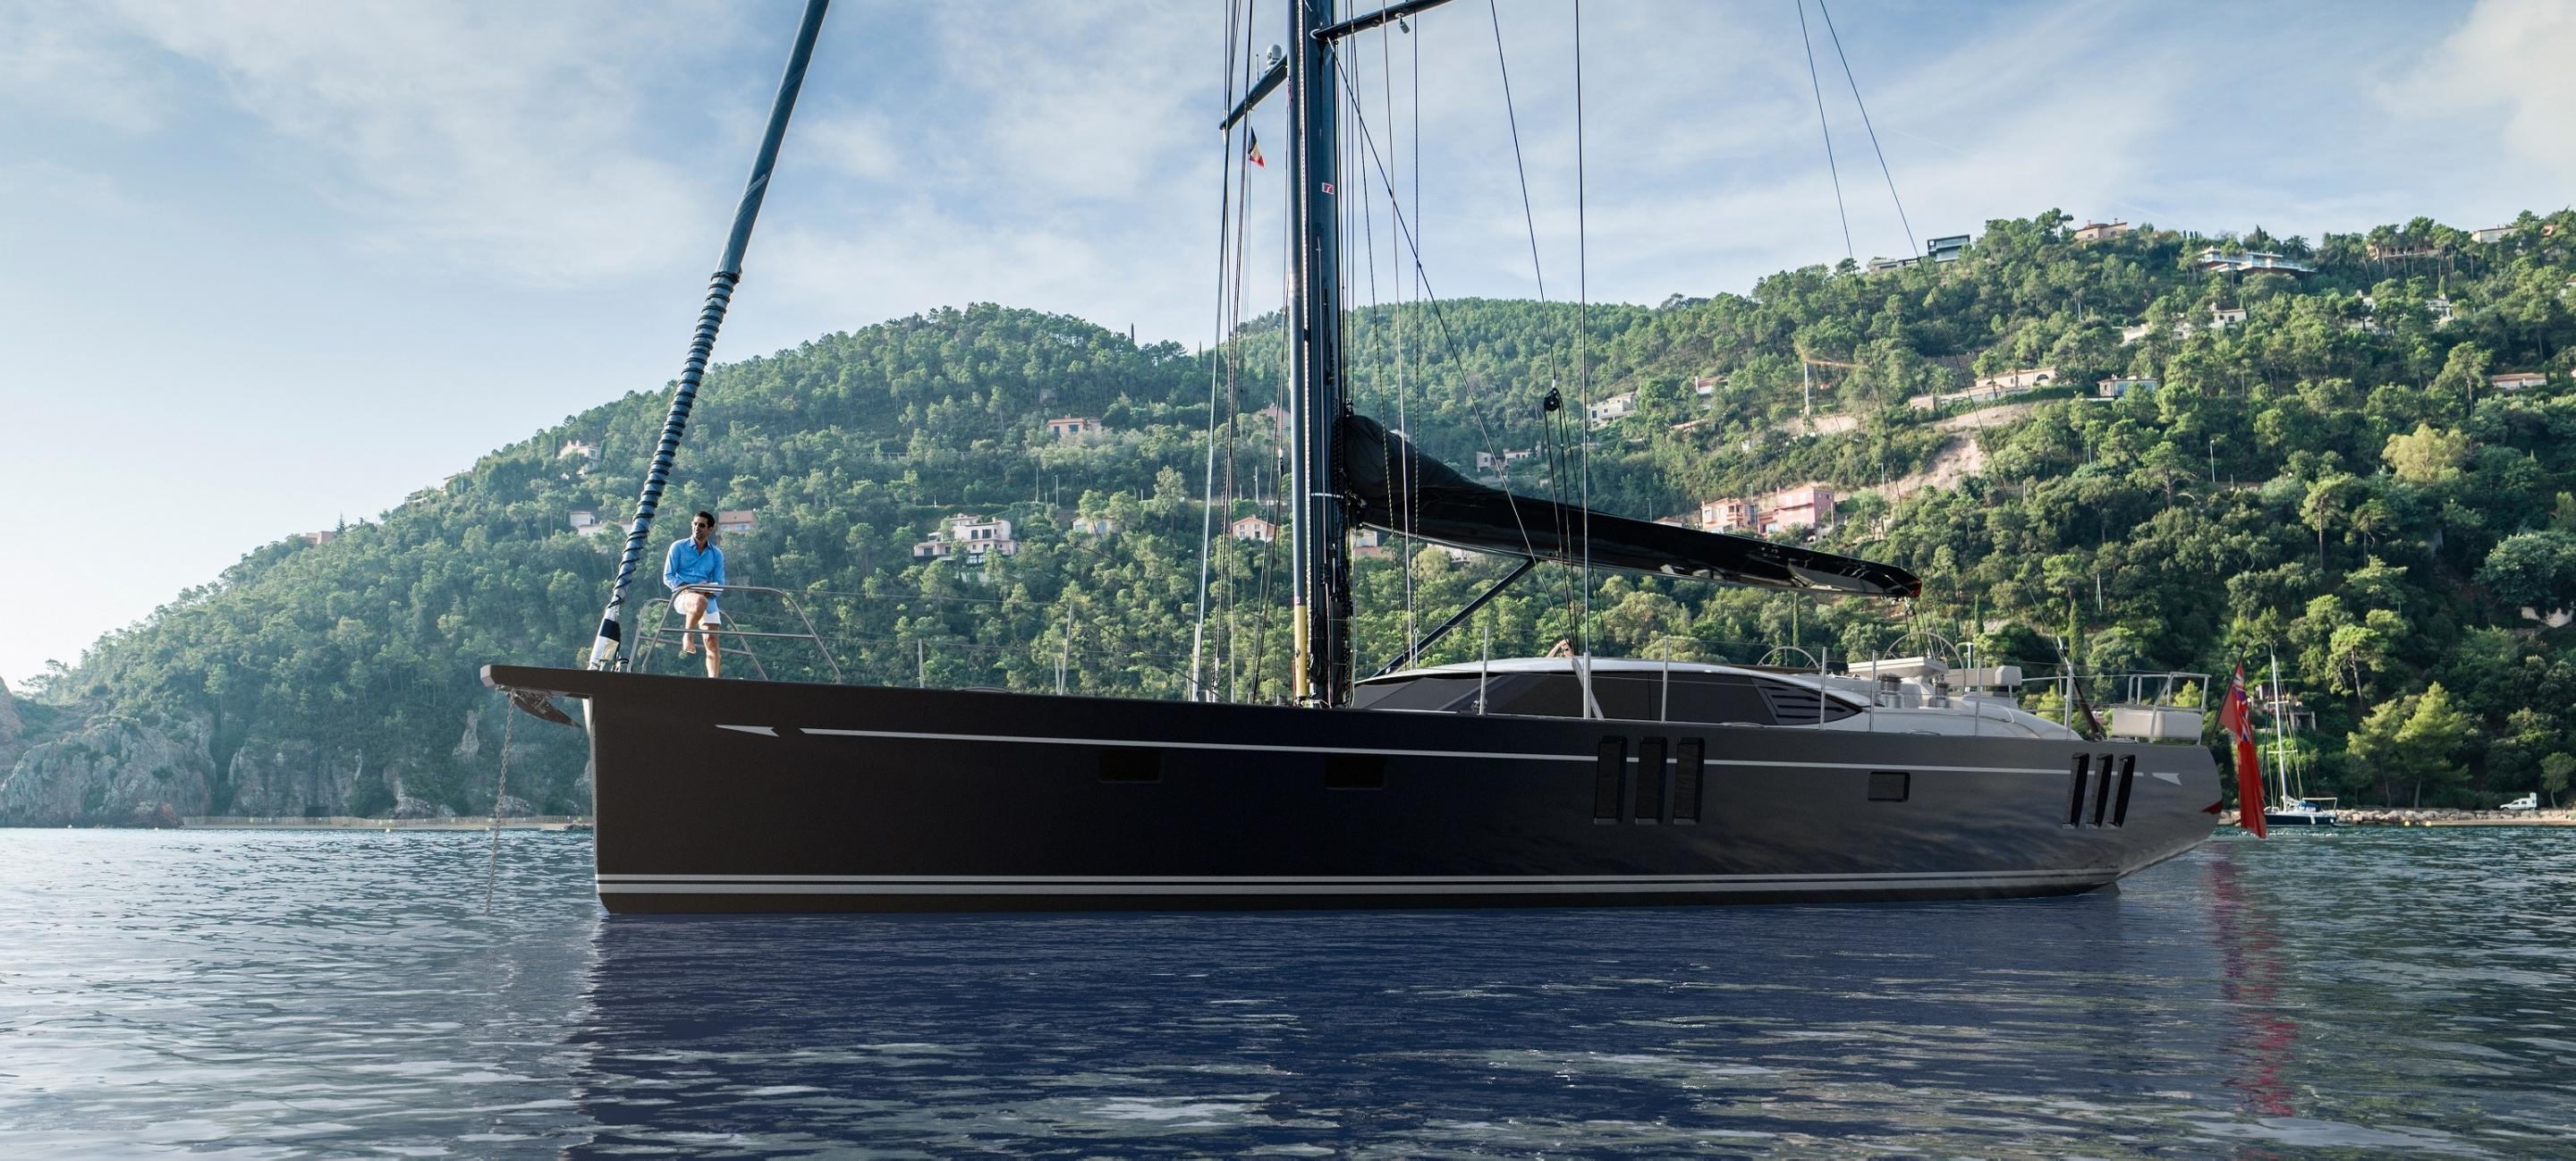 oyster yachts prices